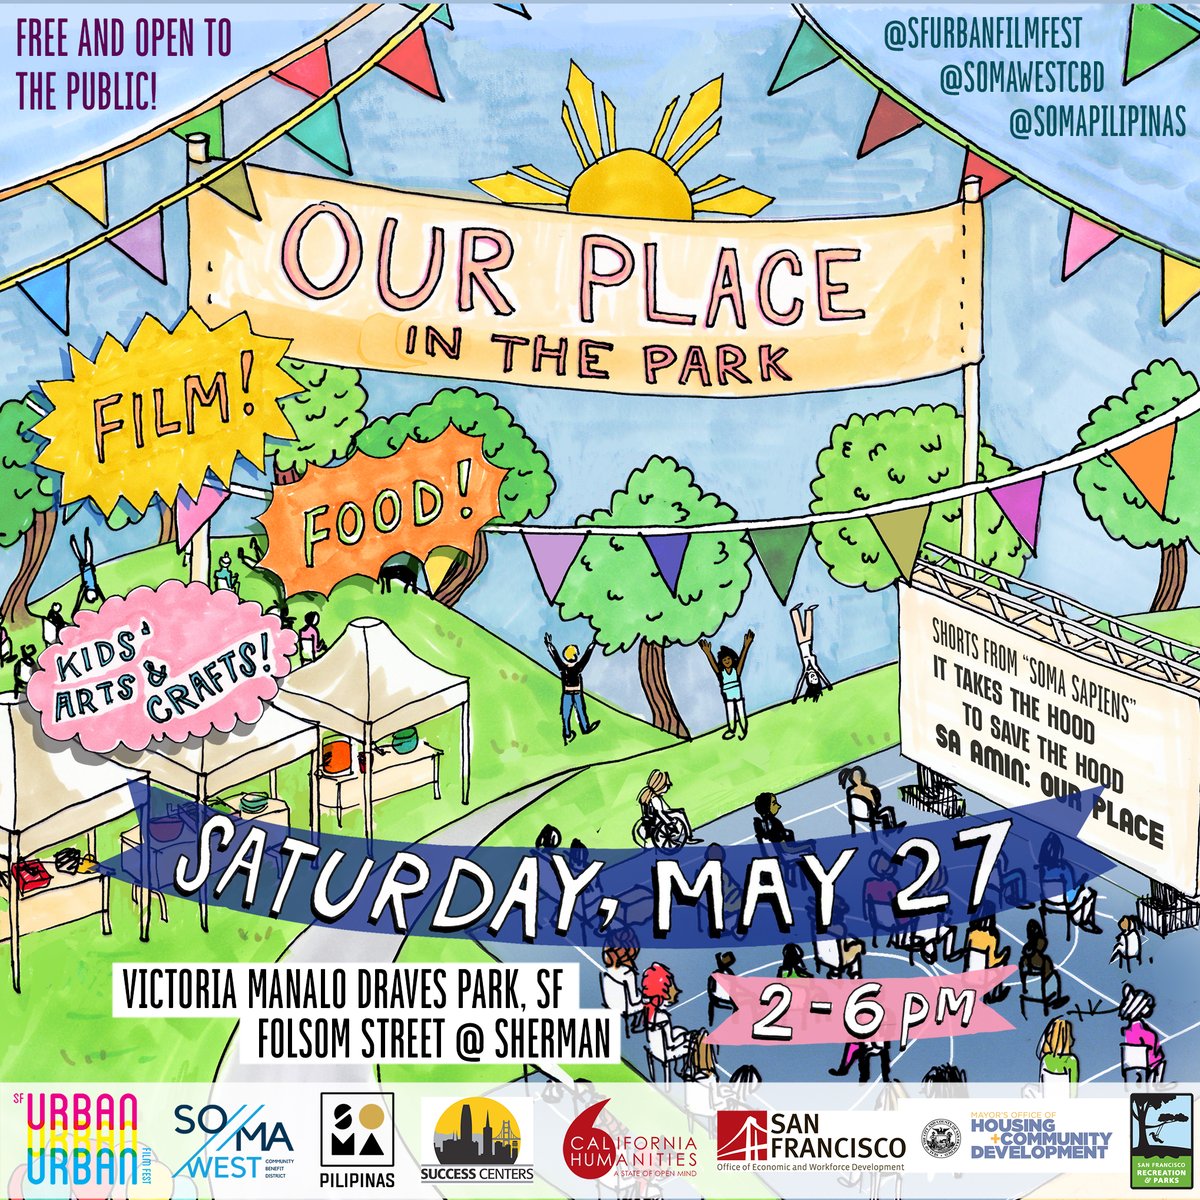 Join us on Saturday 5/27 from 2-6PM for Our Place in the Park at VMD Park! We'll be screening our newly edited documentary, 'Sa Amin: Our Place' directed by Dyan Ruiz & edited by Joseph Smooke, Co-Founders of @PeoplePowMedia. Register & get details here: bit.ly/ourplaceinthep…